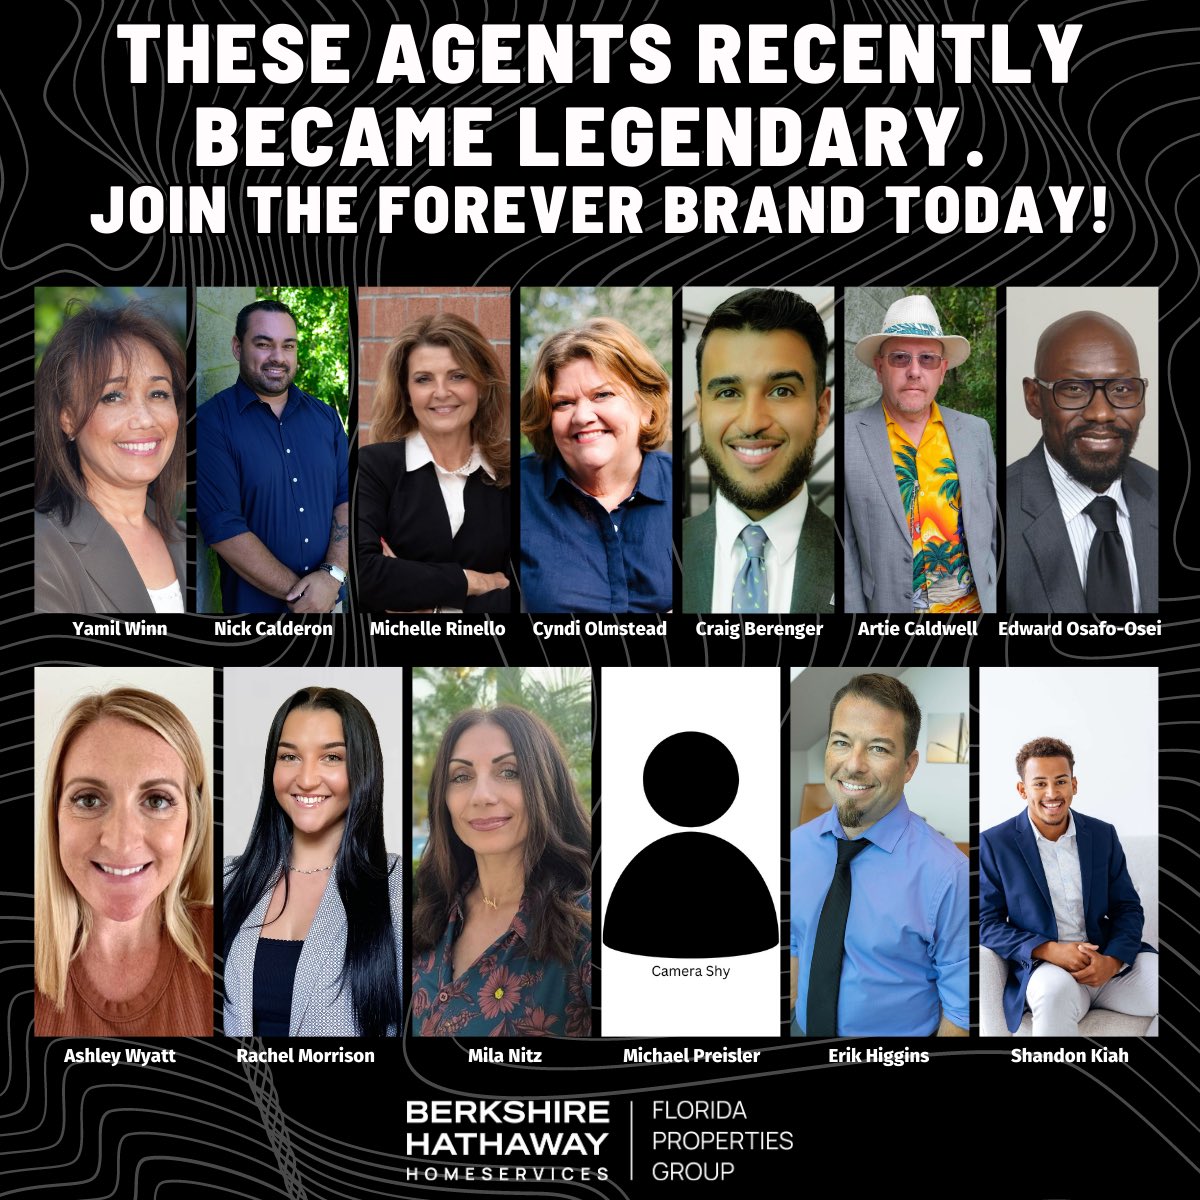 Our brand demands more from our Legendary agents so our customer's experience is Legendary. Join the #foreverbrand today! 
#bhhsrealestate #bhhsflpg #floridarealestate #oldsmarrealestate #tamparealestate